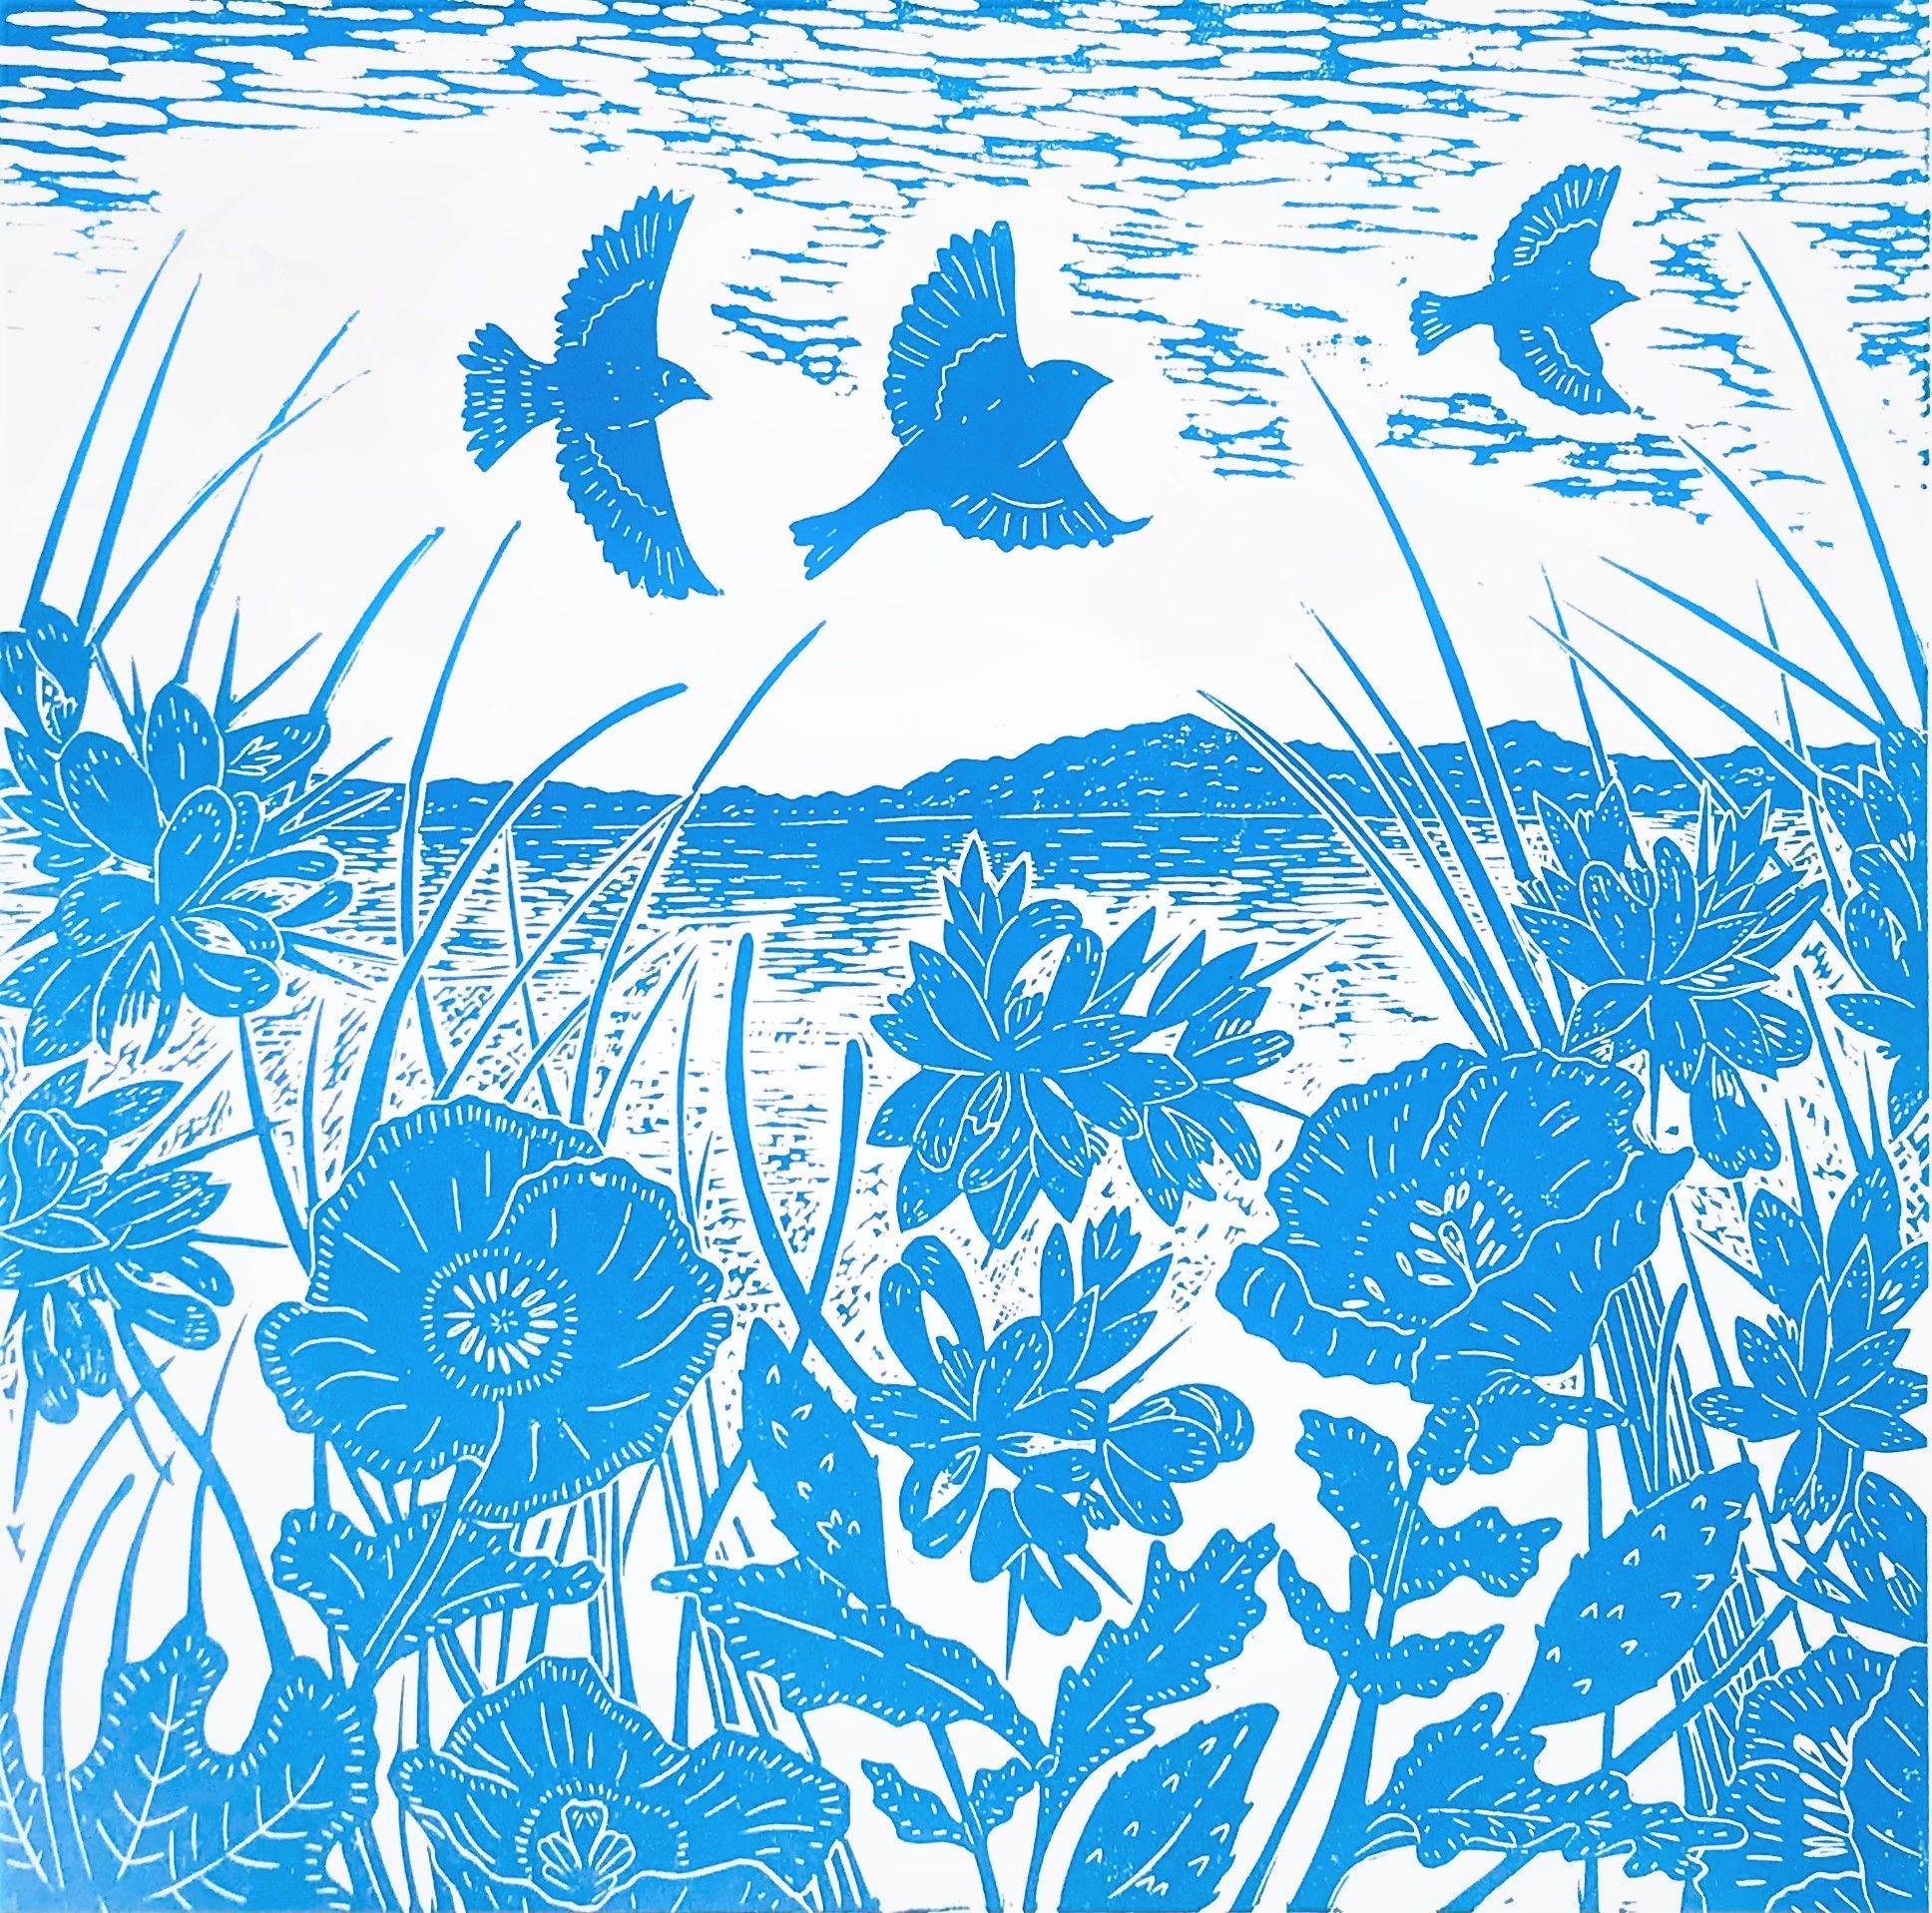 Linnets Over Salthouse by Joanna Padfield